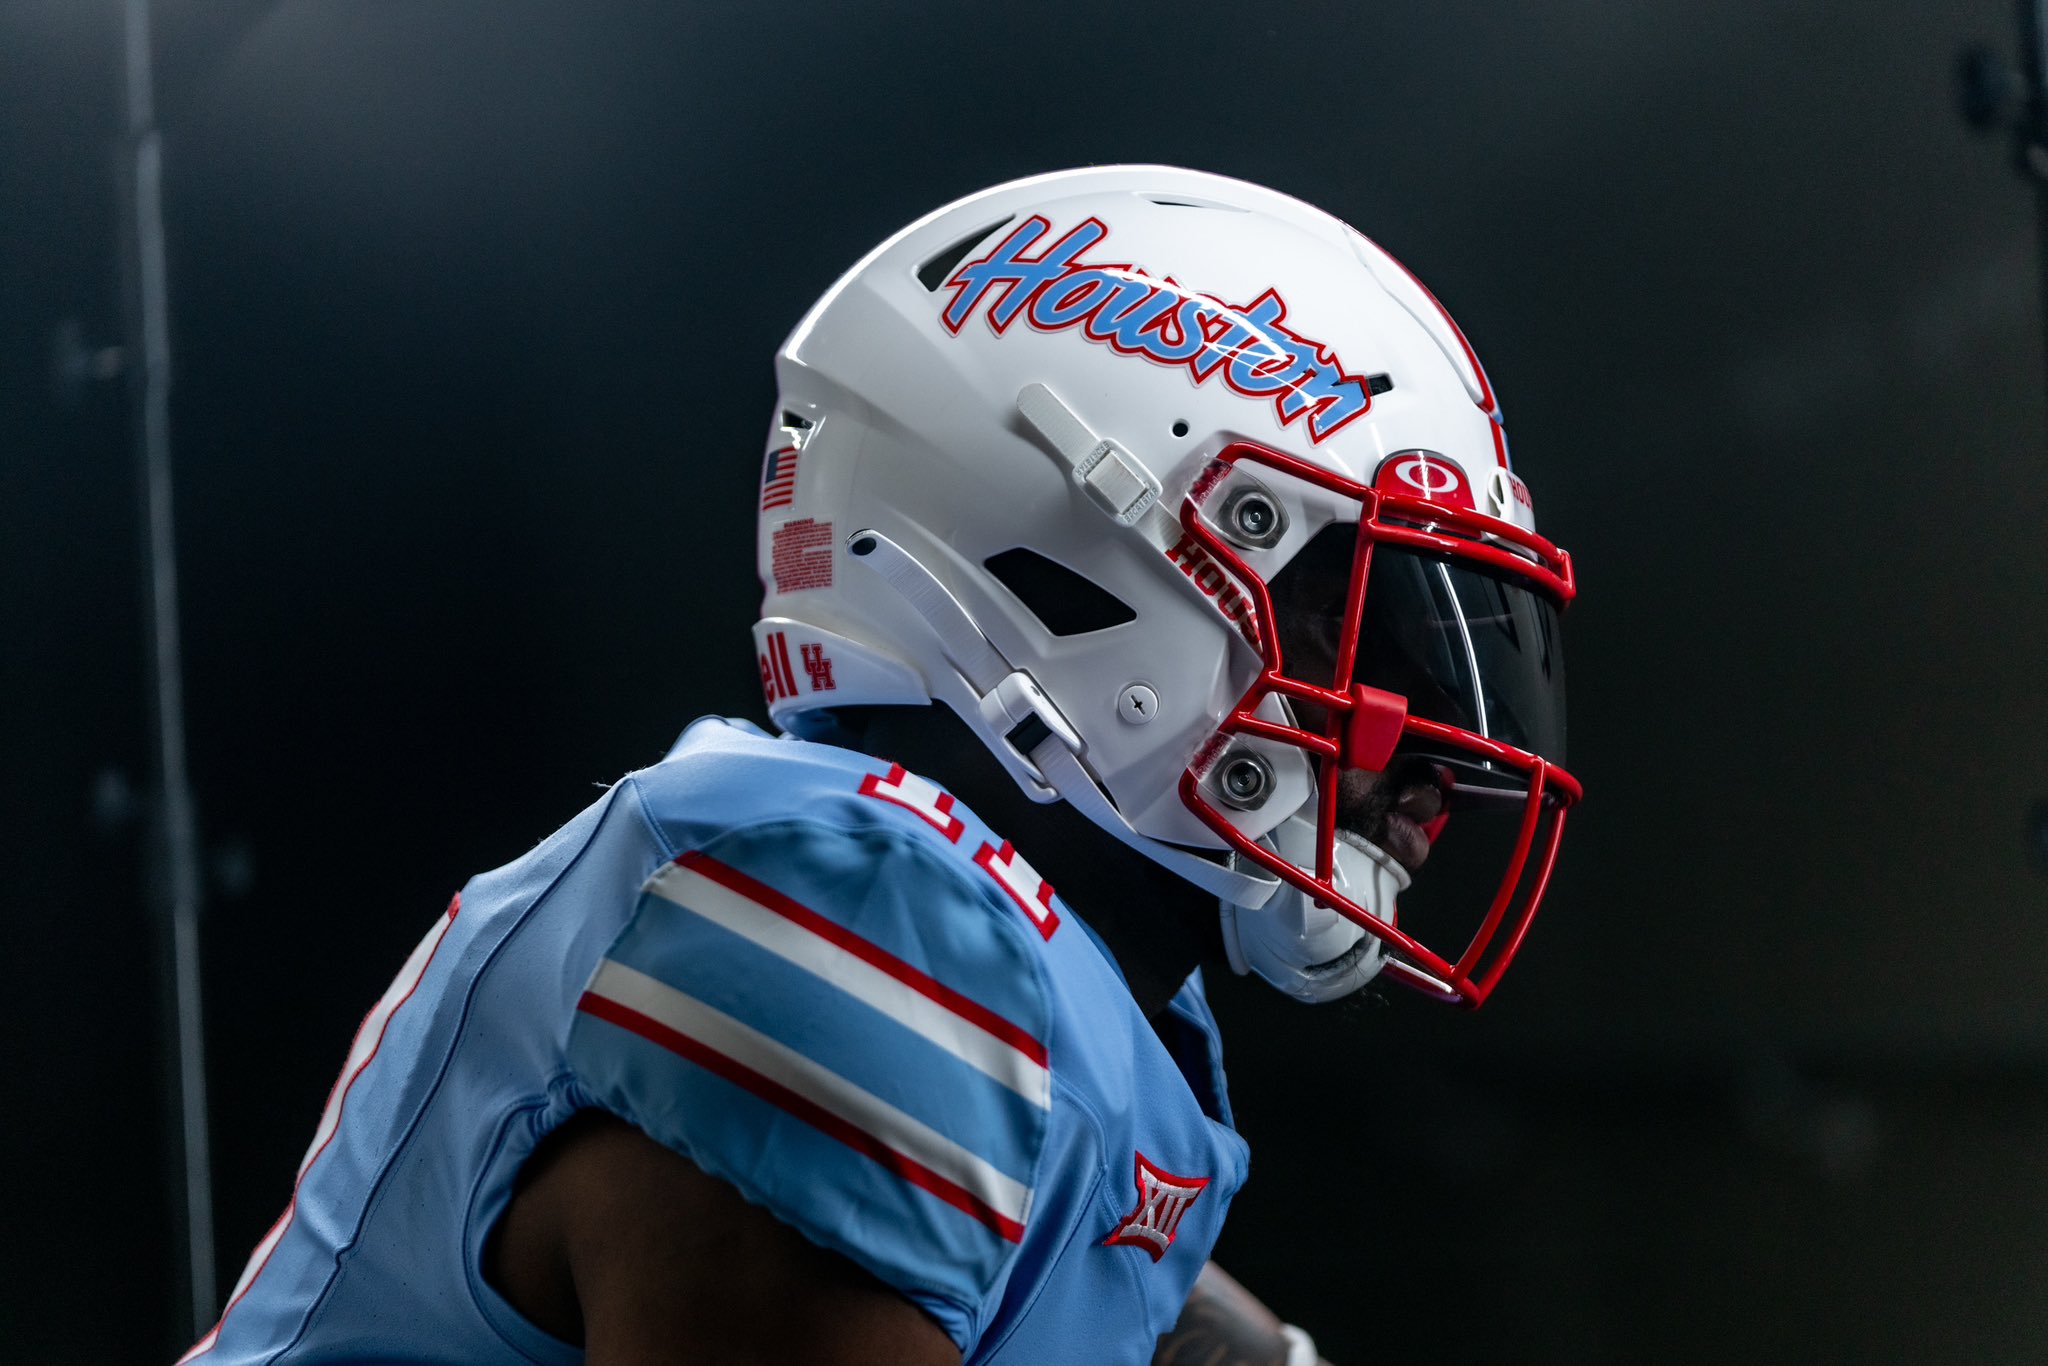 UH receives high praise for Houston Oilers inspired uniforms